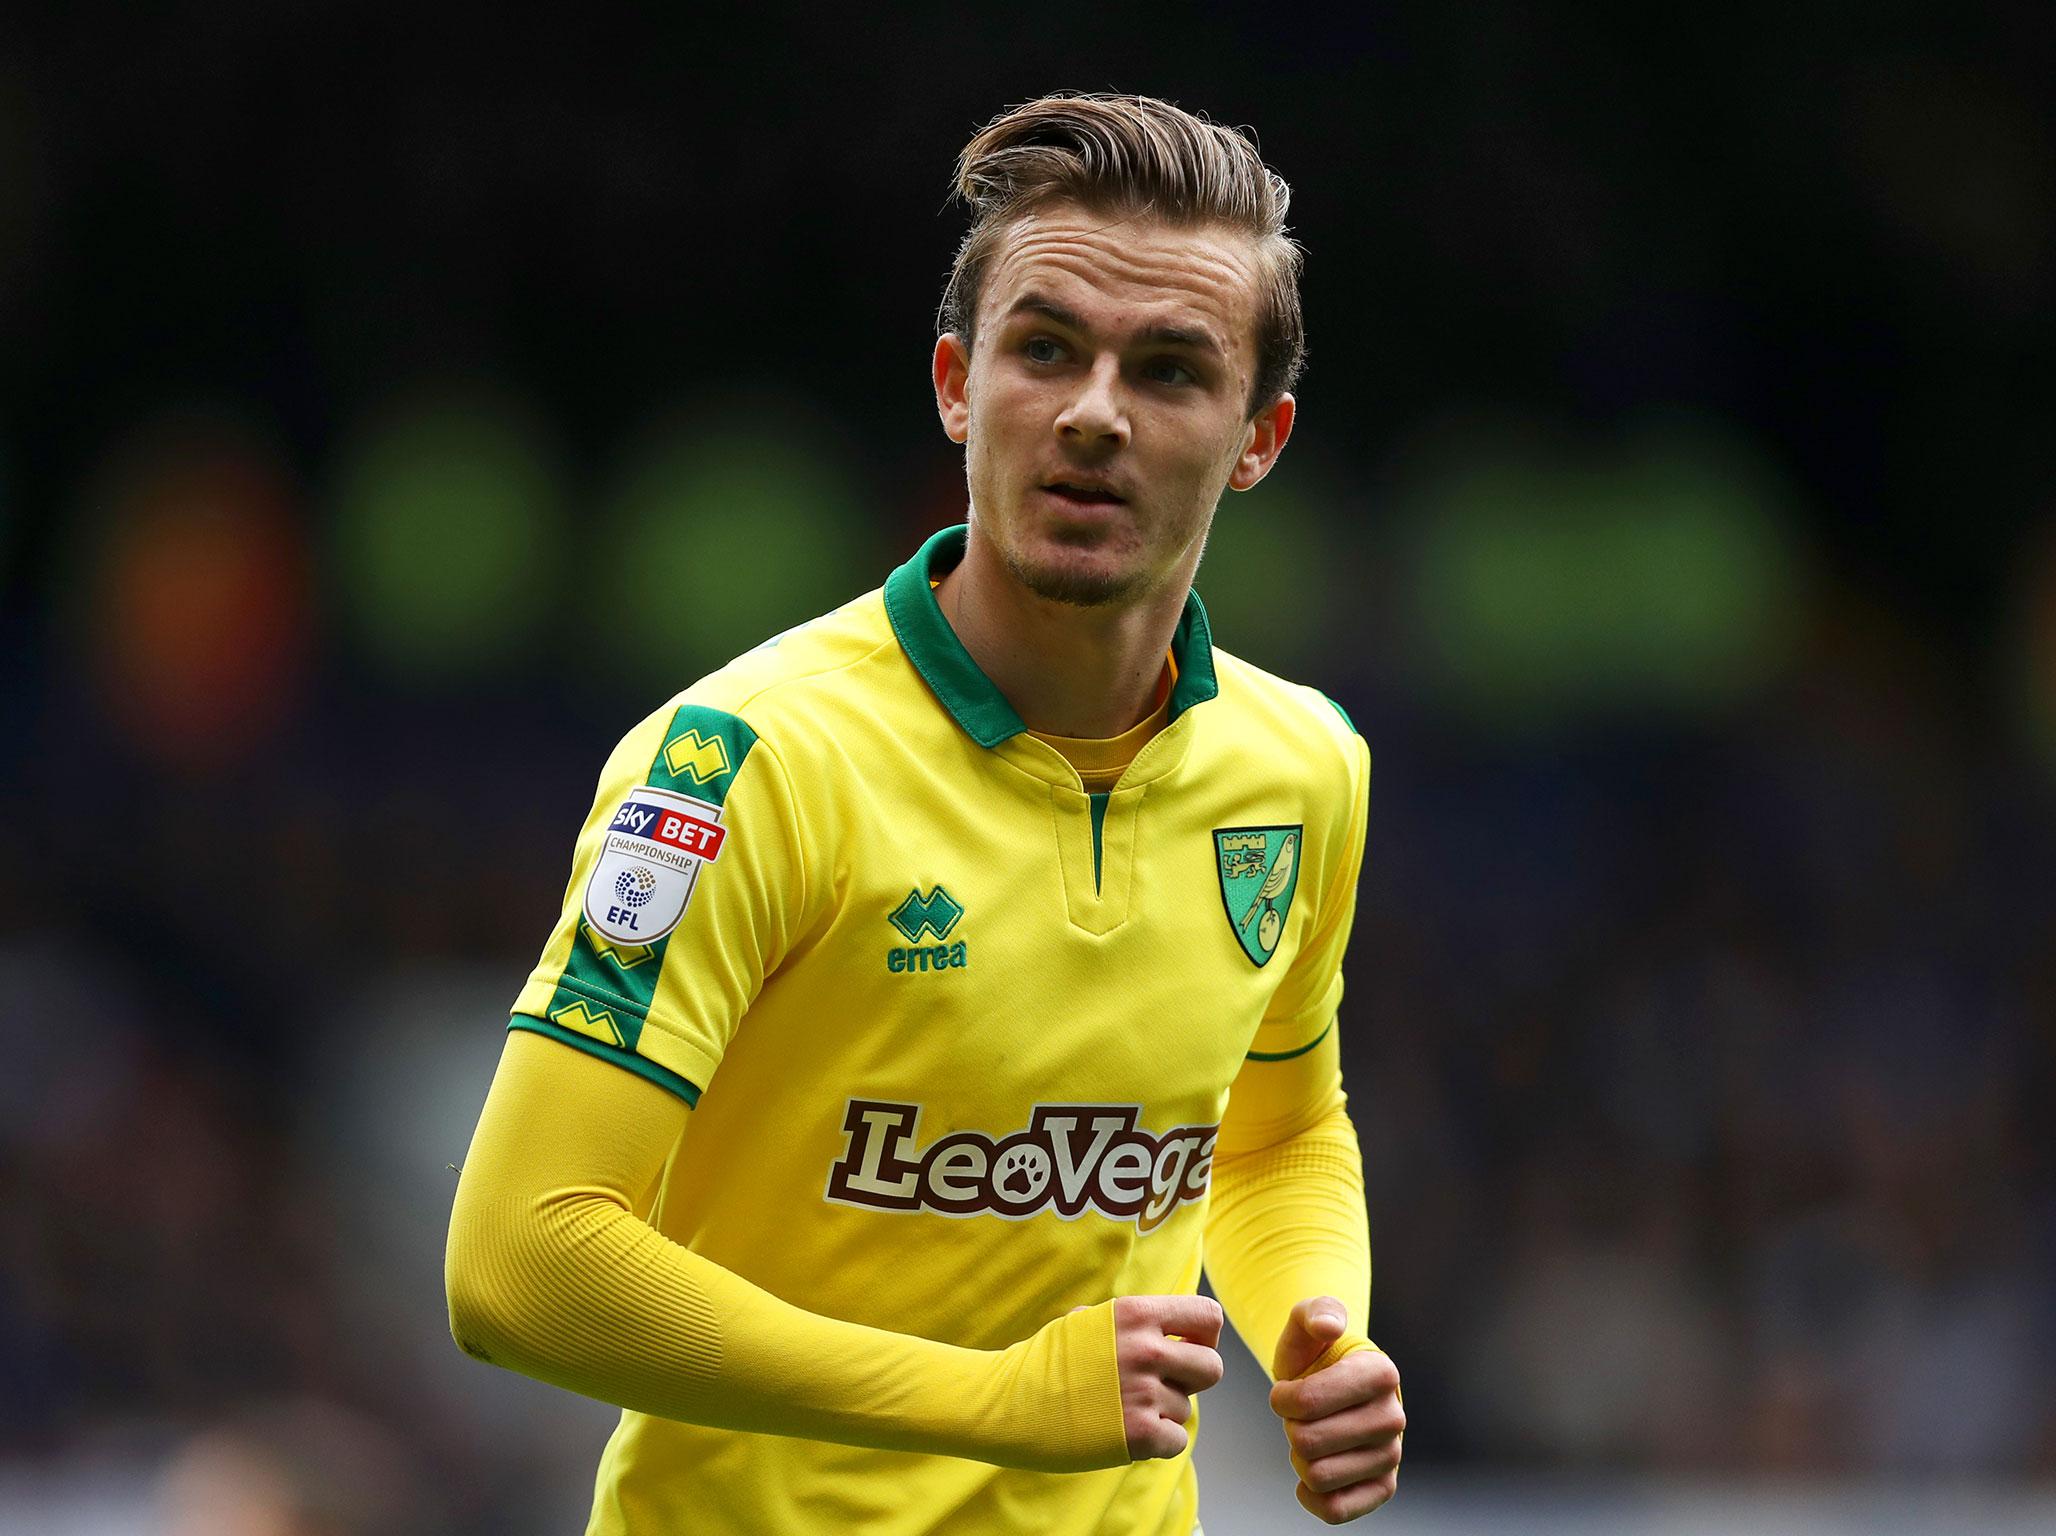 James Maddison has been in superb form this season for Norwich